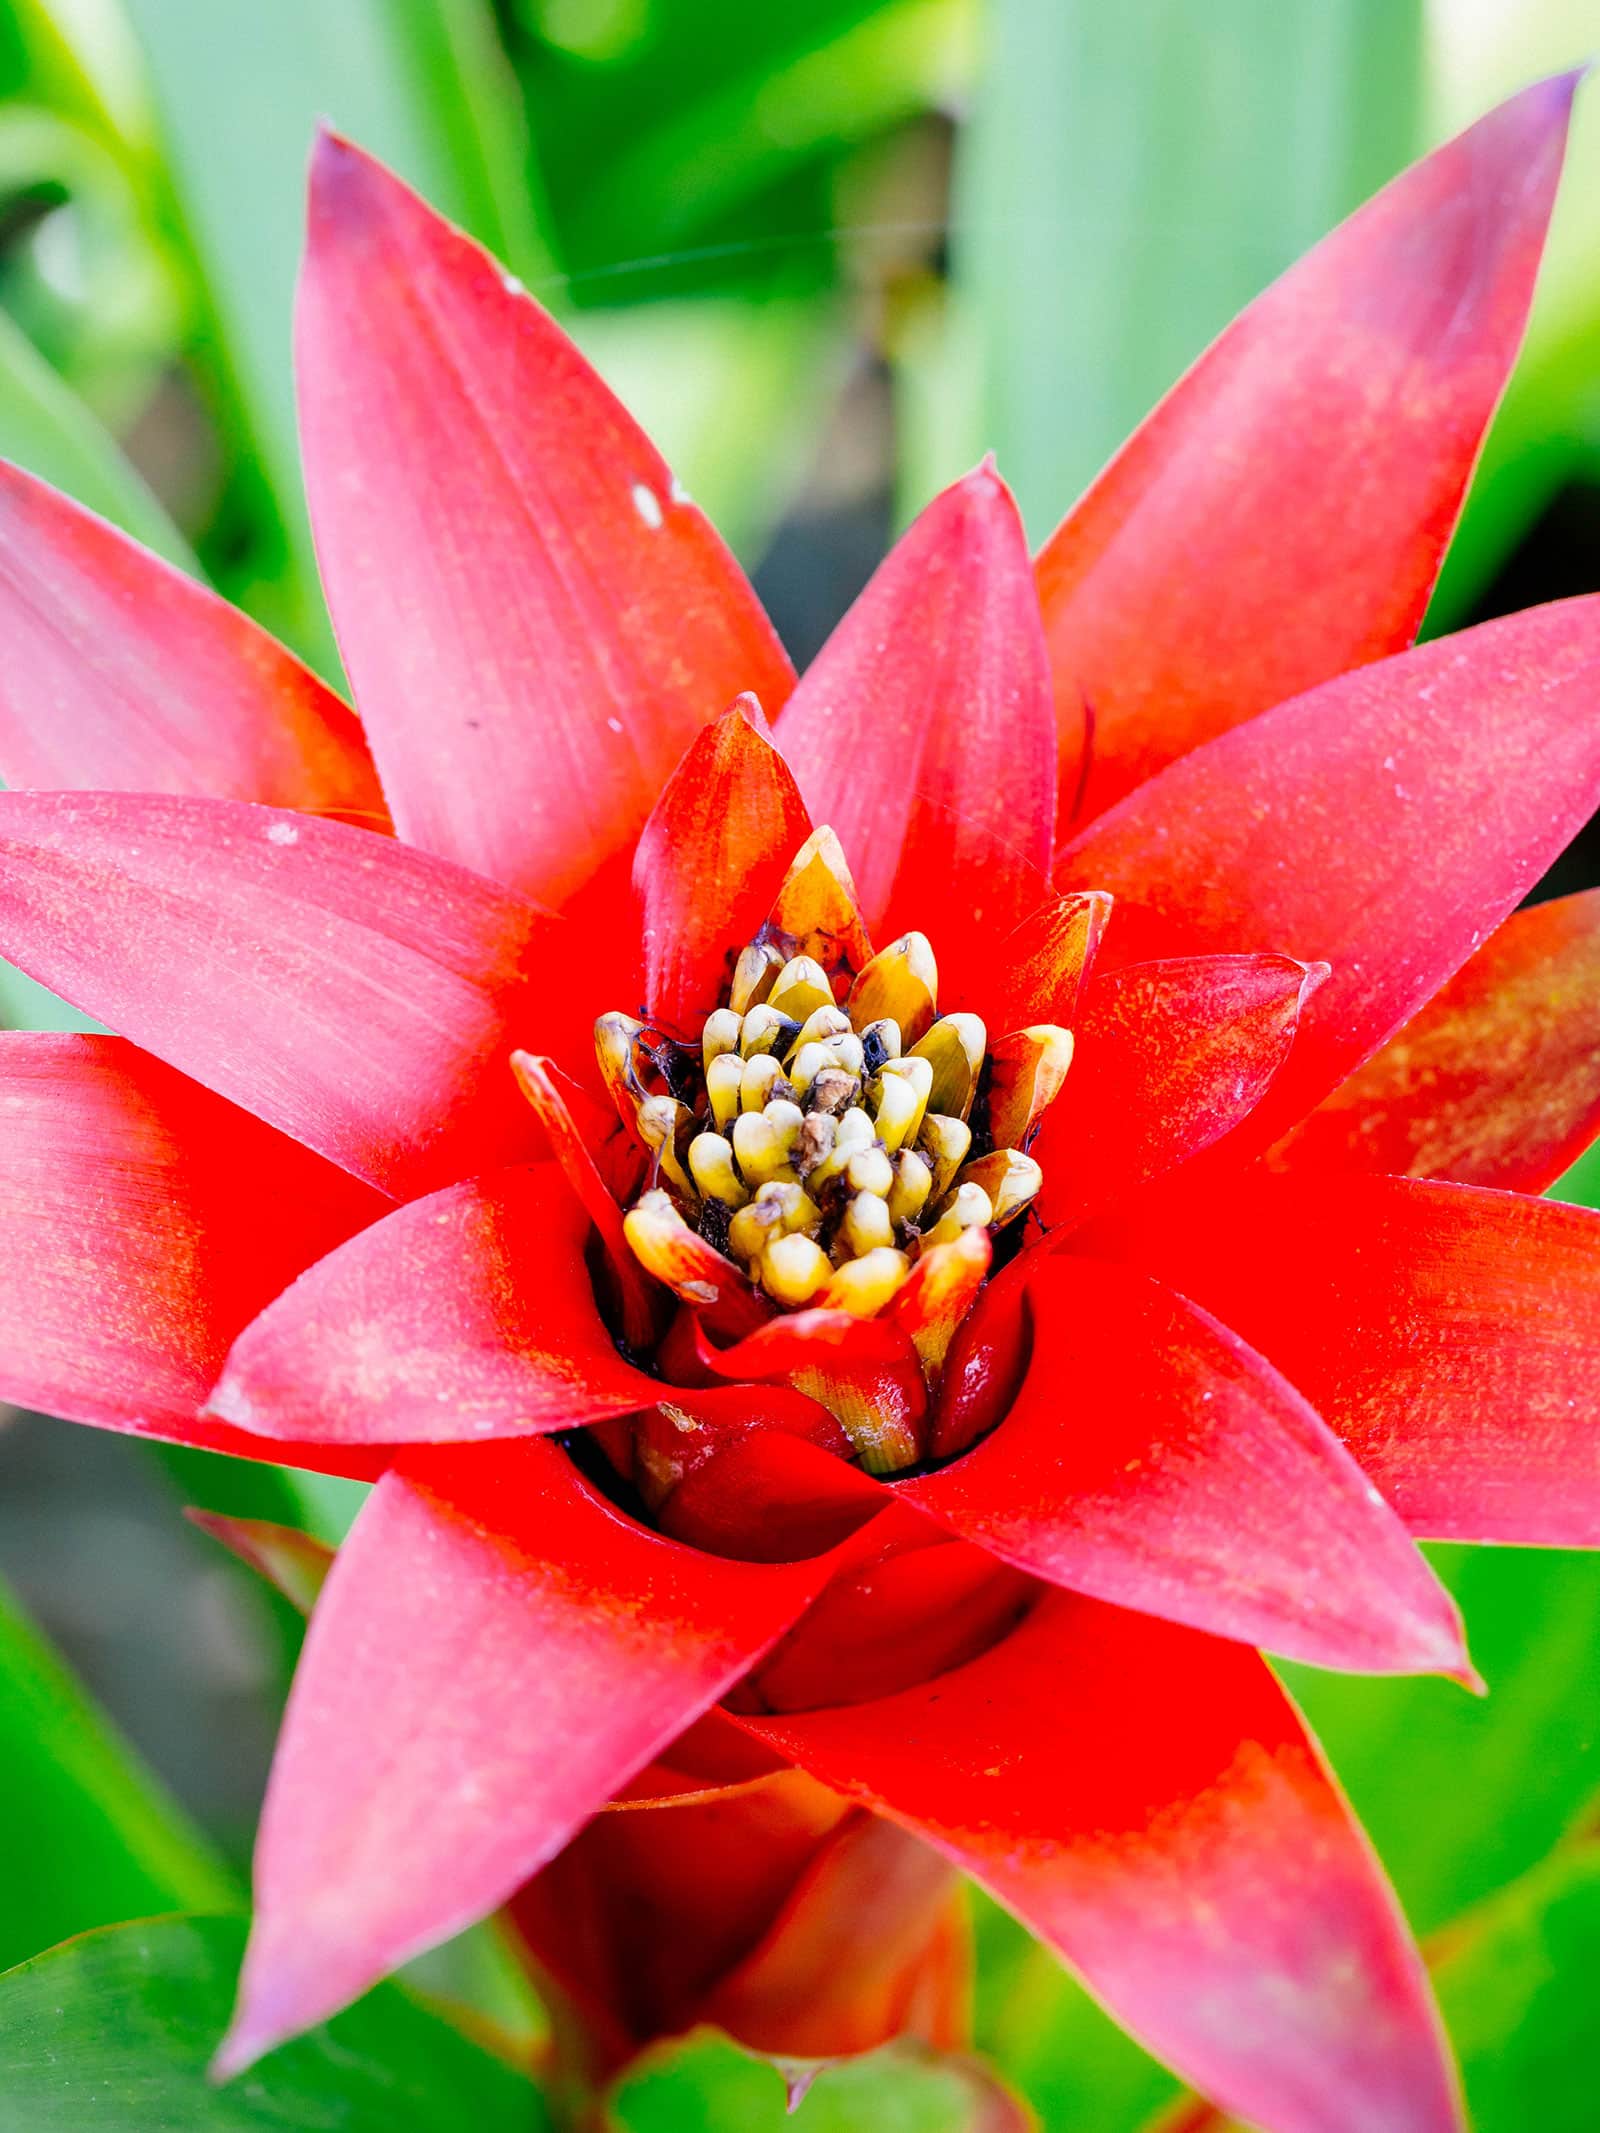 A bright red Guzmania bromeliad flowerhead with white flower buds inside the cup